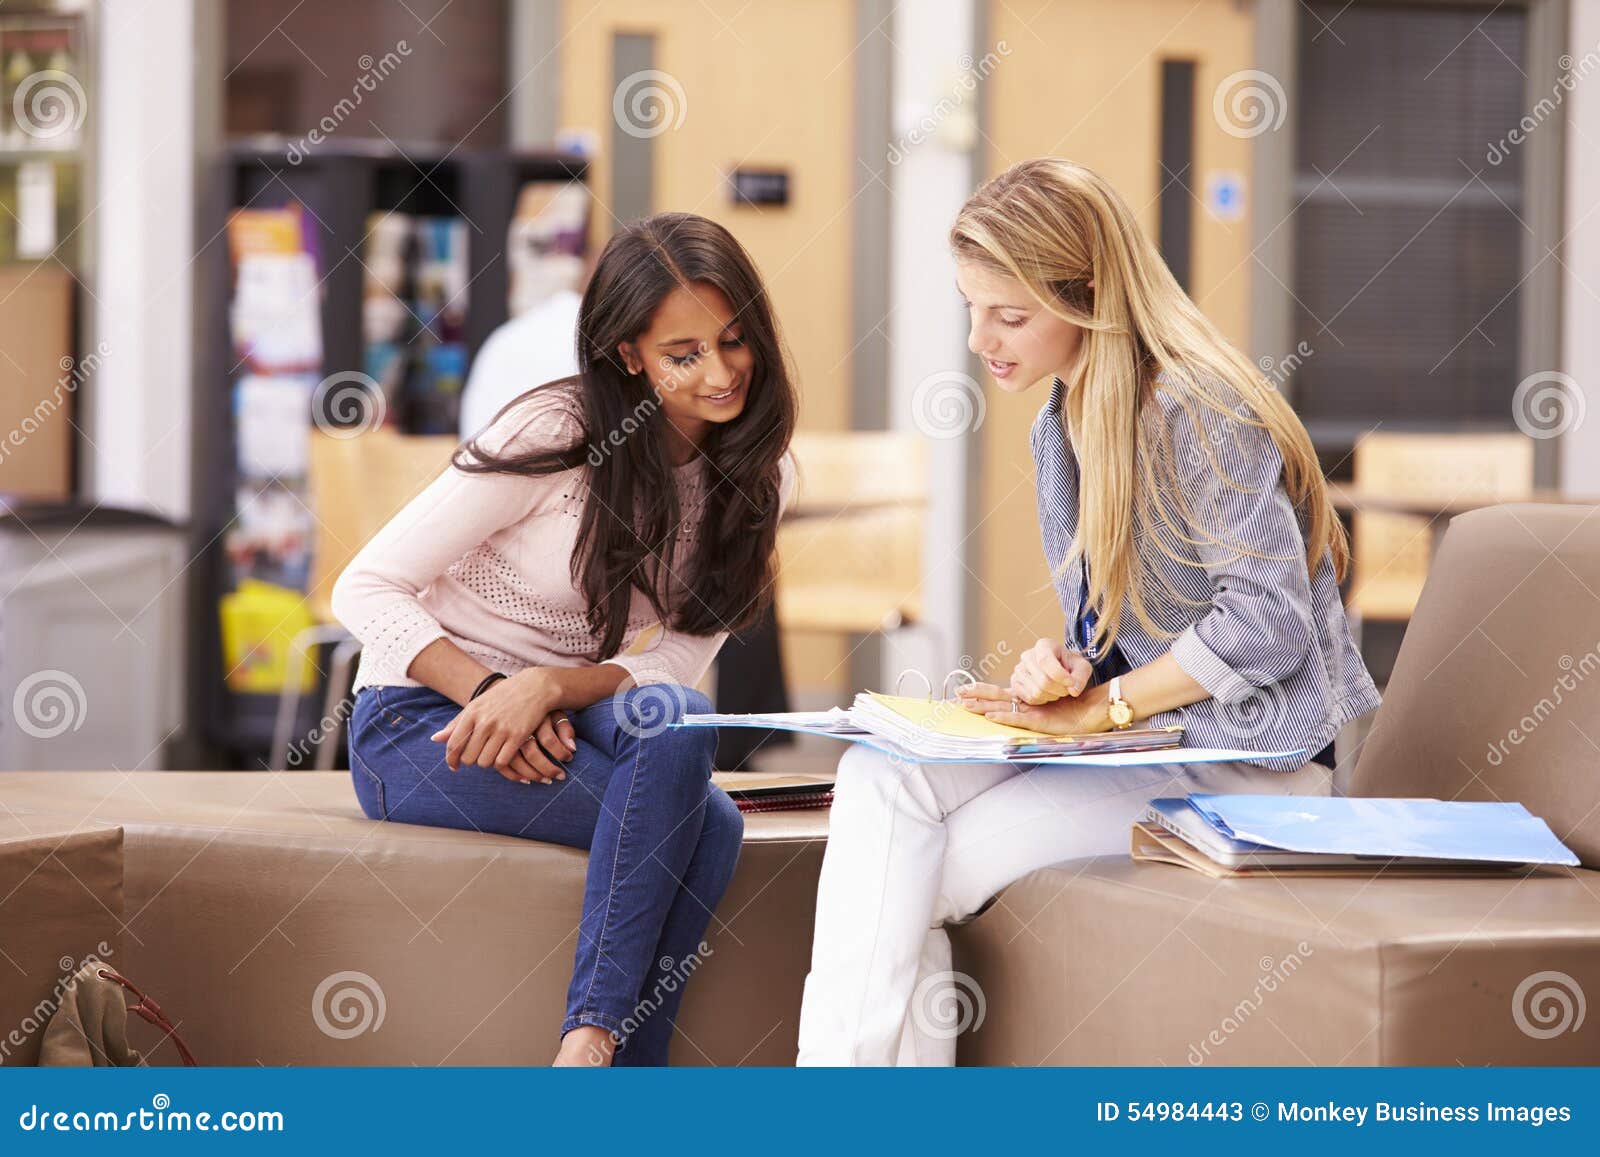 female college student working with mentor